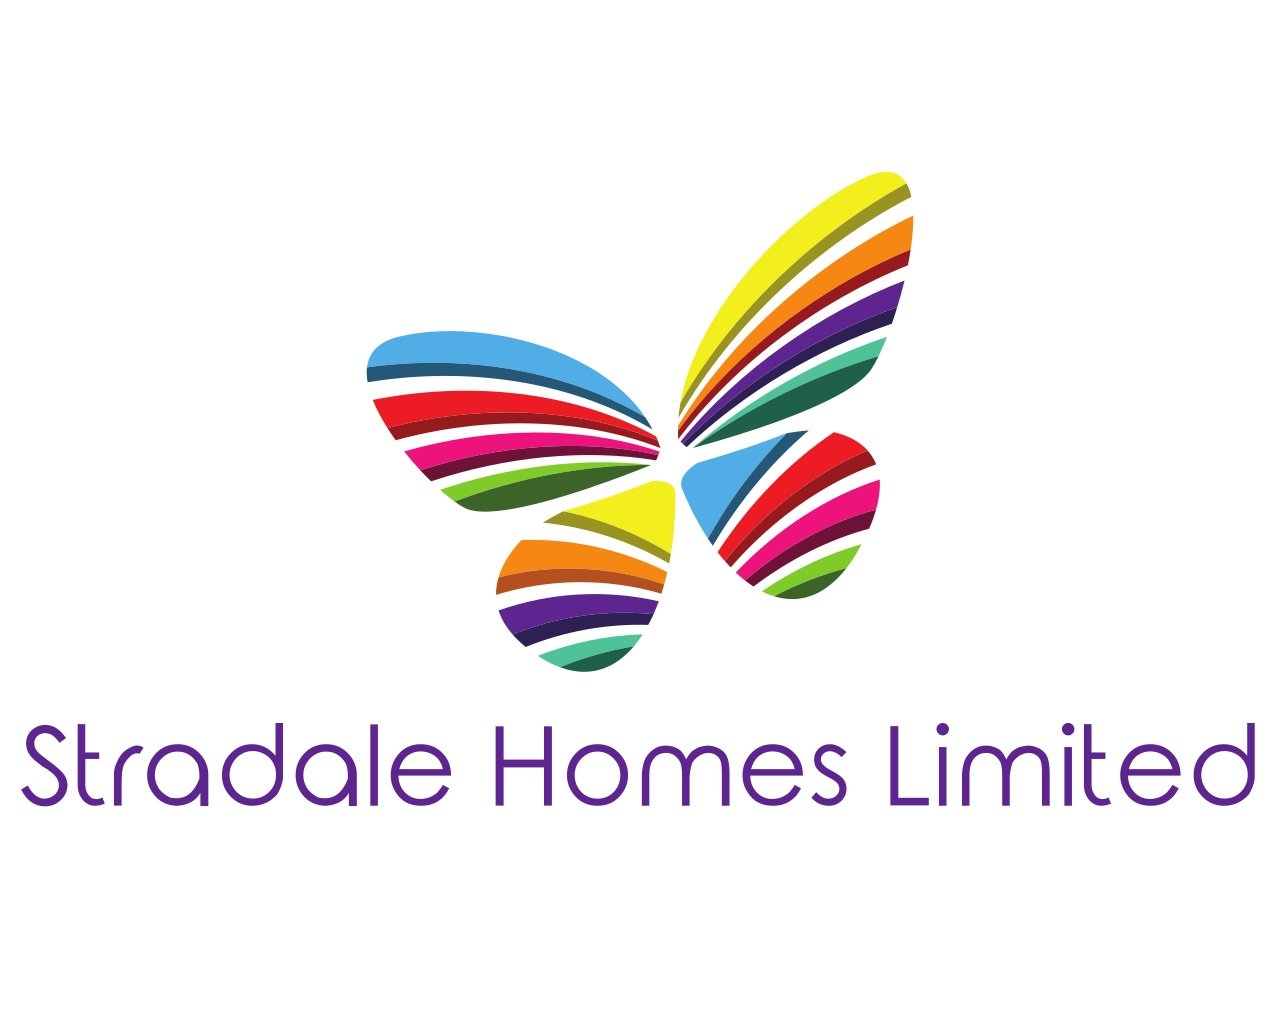 Stradale Homes Limited